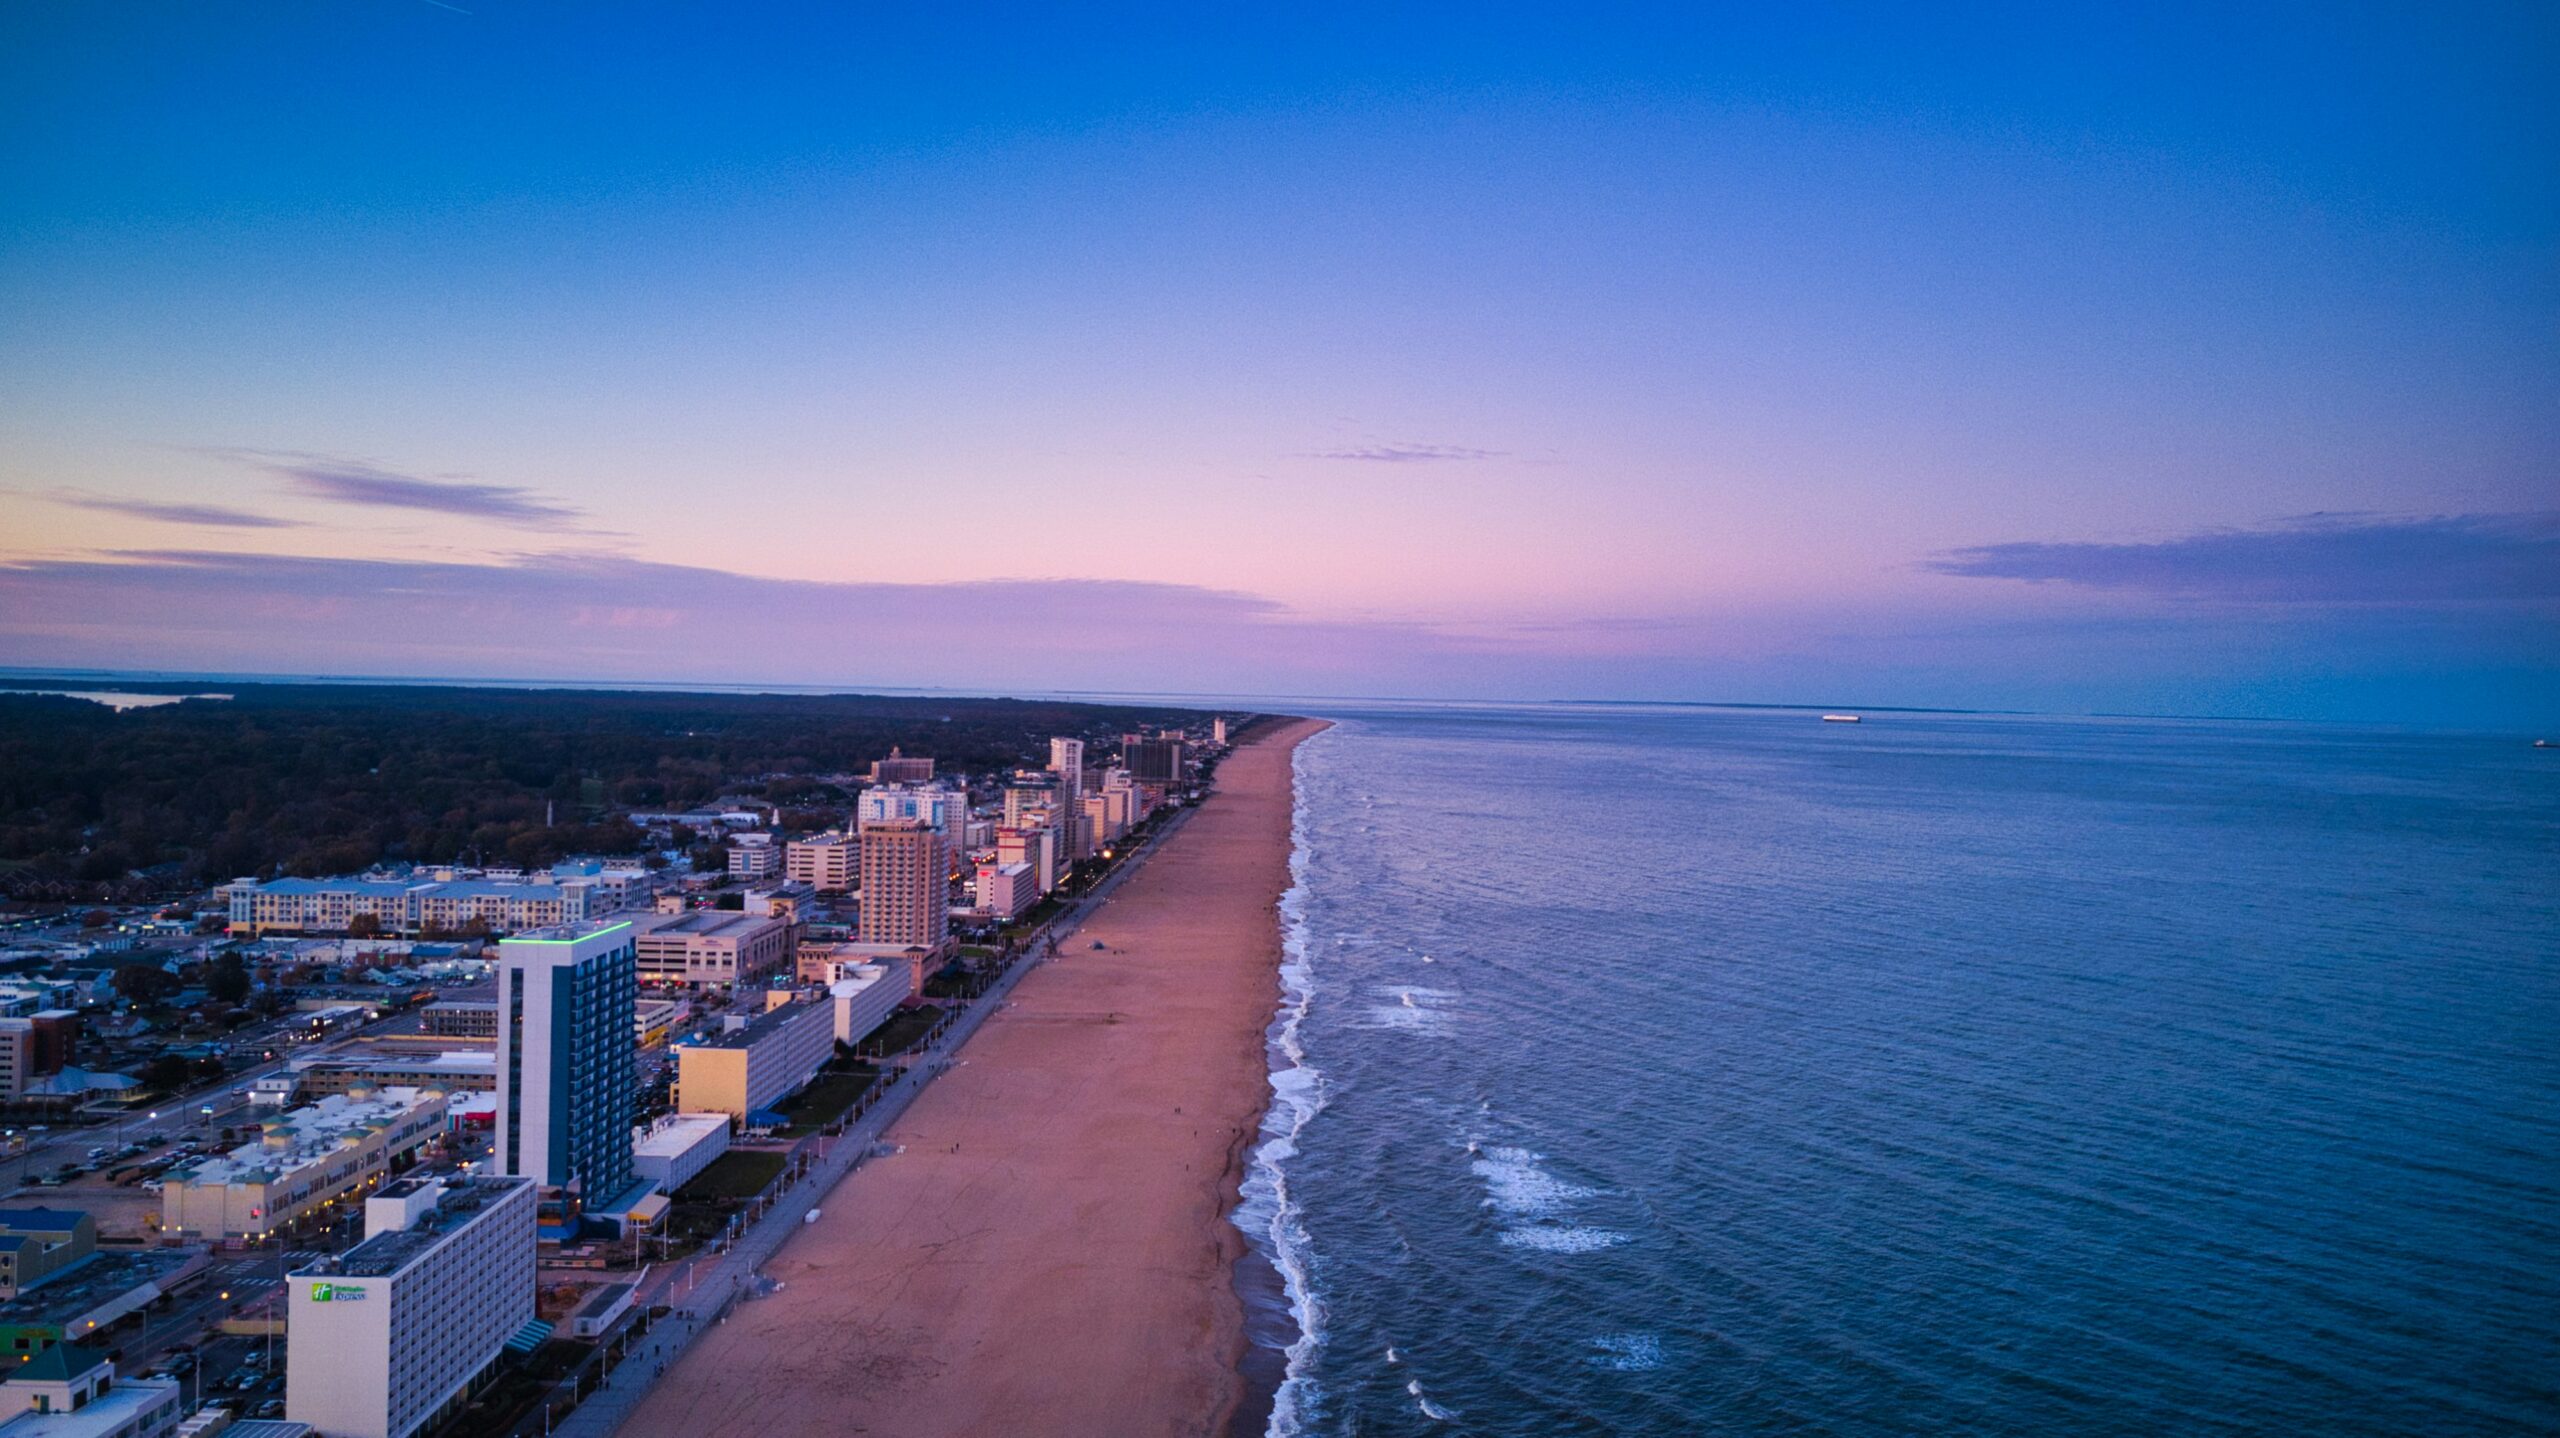 Live right by the beach in one of the best places to live in Virginia. Pictured: A skyline view of Virginia Beach